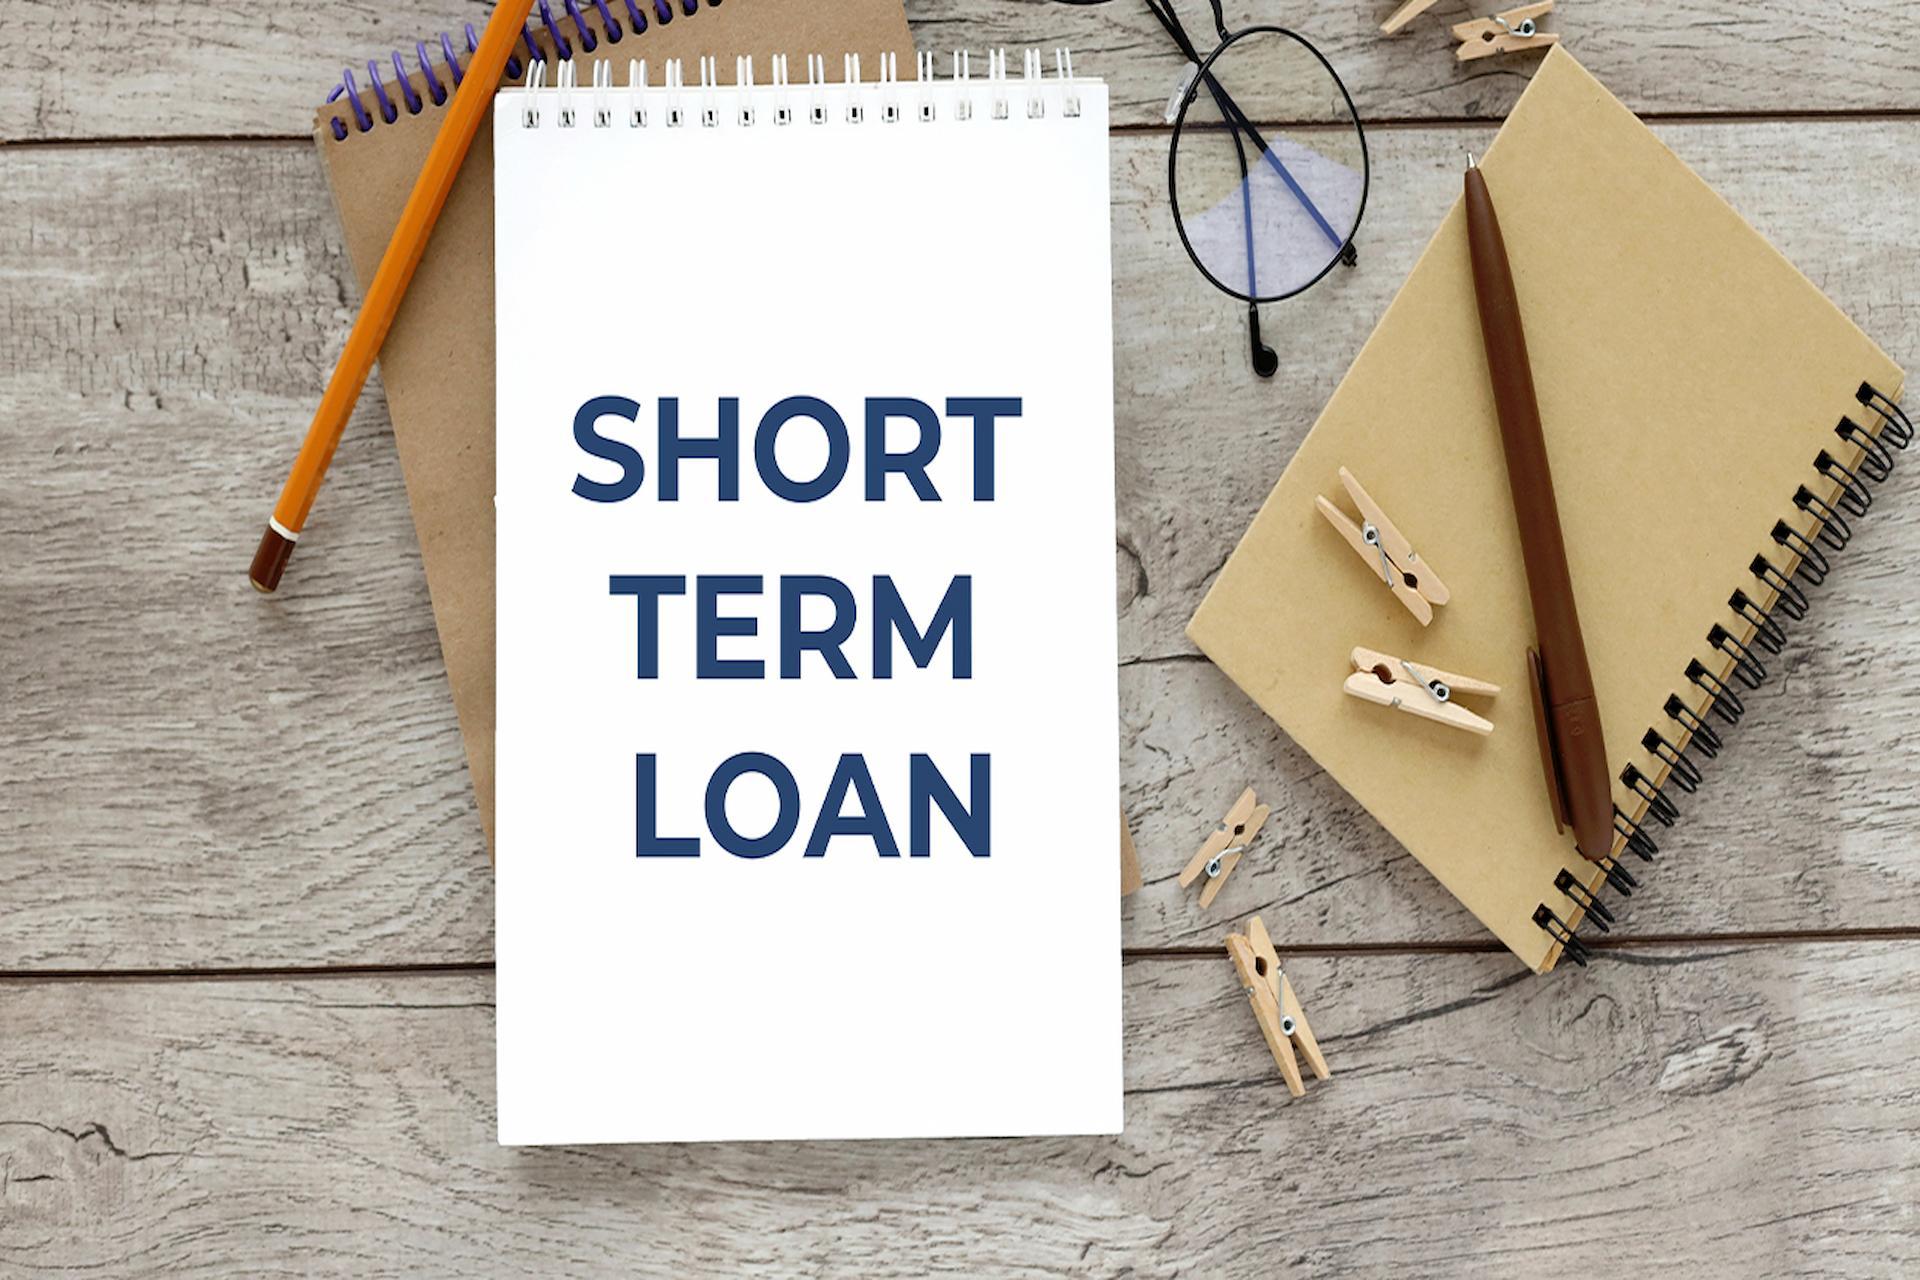 Top Lenders for £200 Loans: Finding the Best Short-Term Loan Options